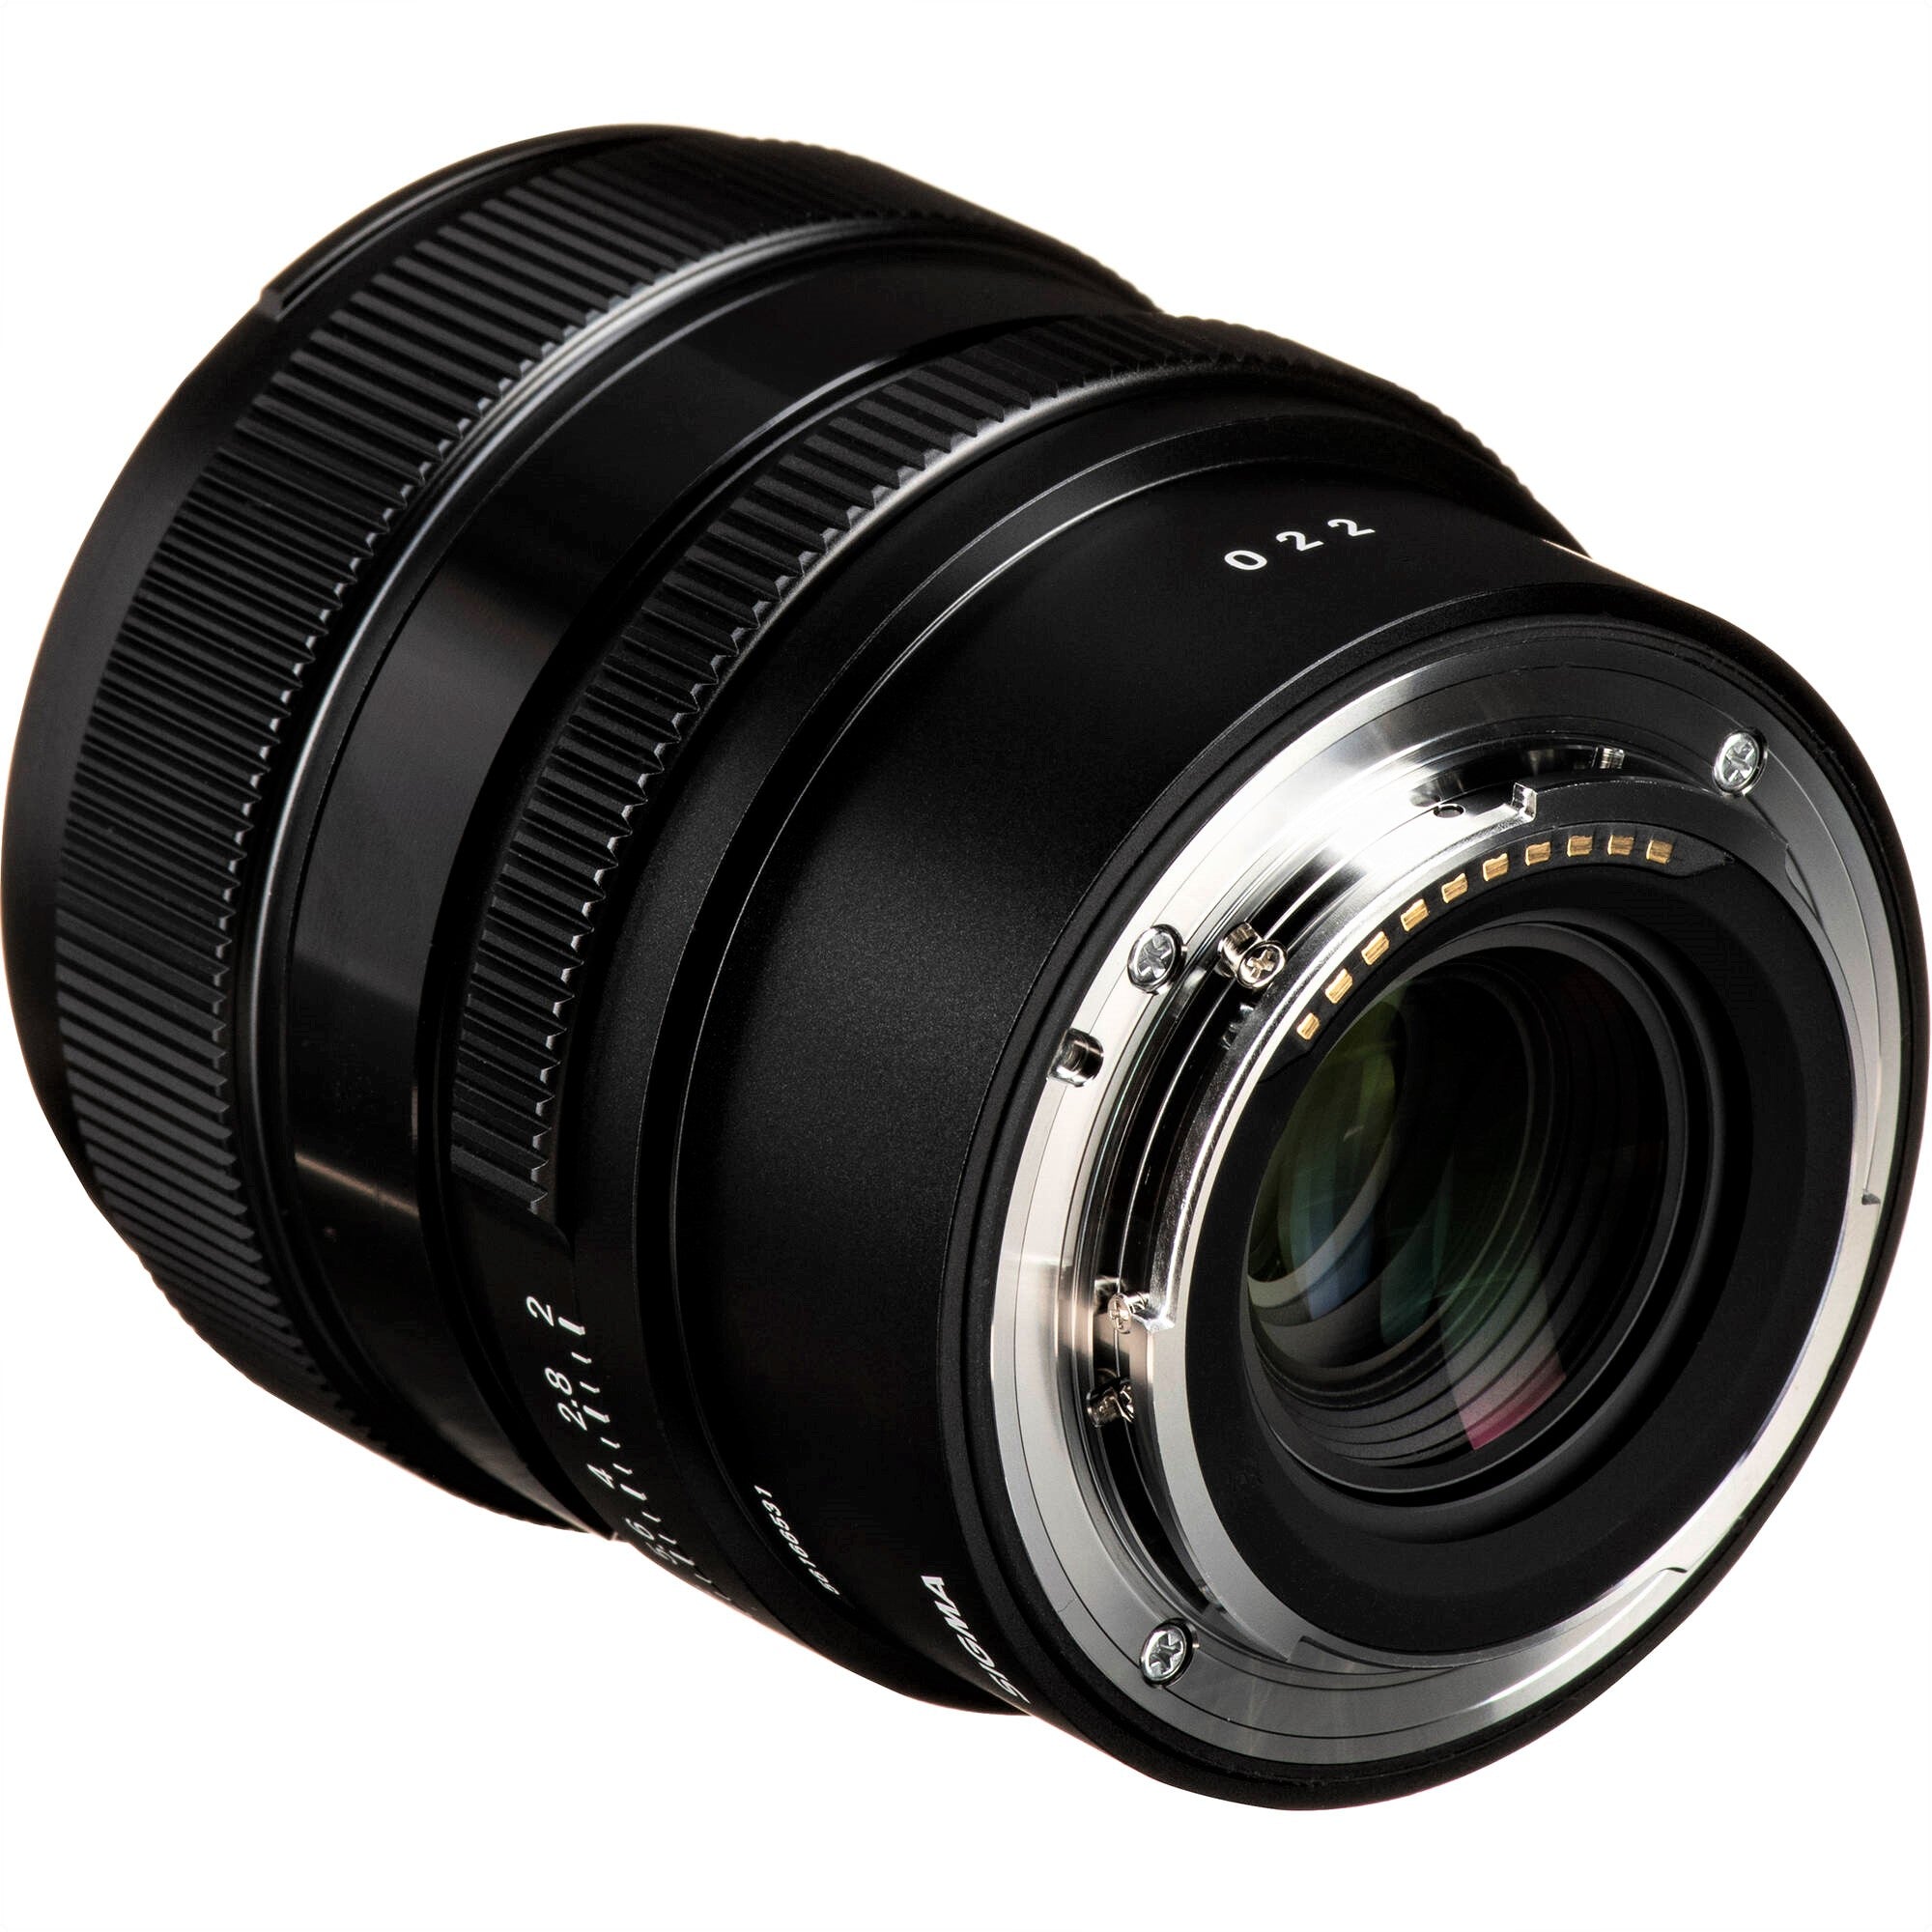 Sigma 20mm F2.0 DG DN Contemporary Lens (Sony E Mount) in a Back-Side View